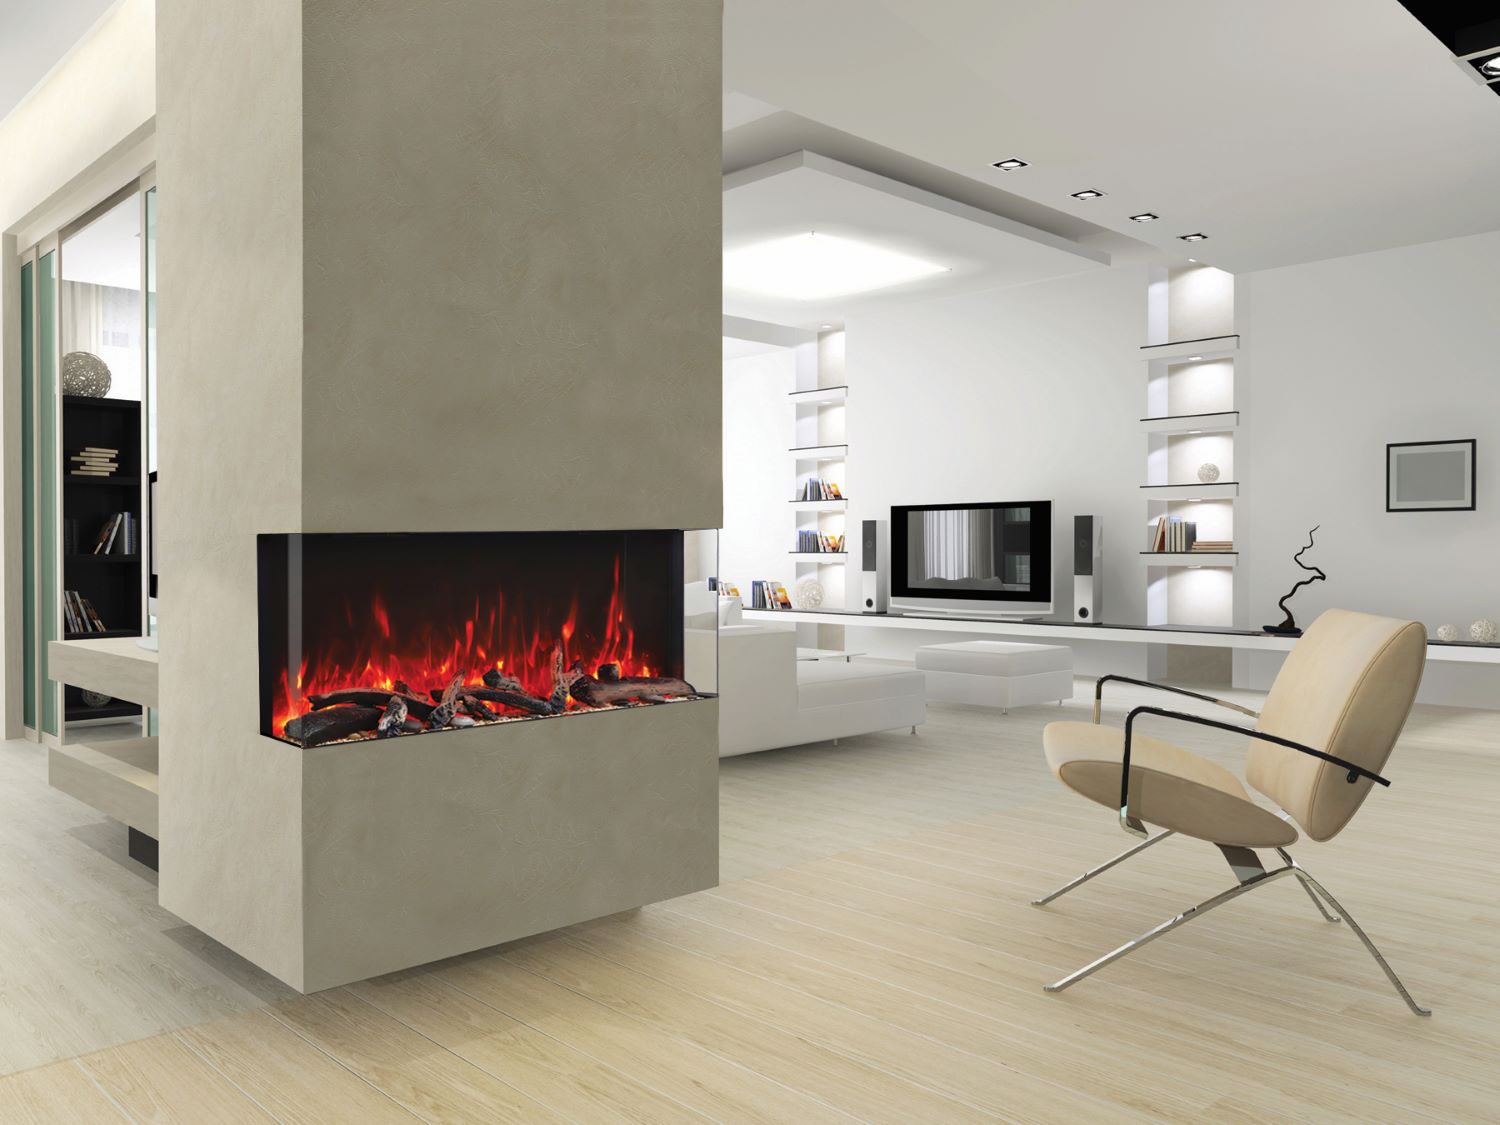 Amantii 50" Tru-View XL XT Three Sided Electric Fireplace -50-TRV-XT-XL- Lifestyle Living Room Fireplace Concrete Division